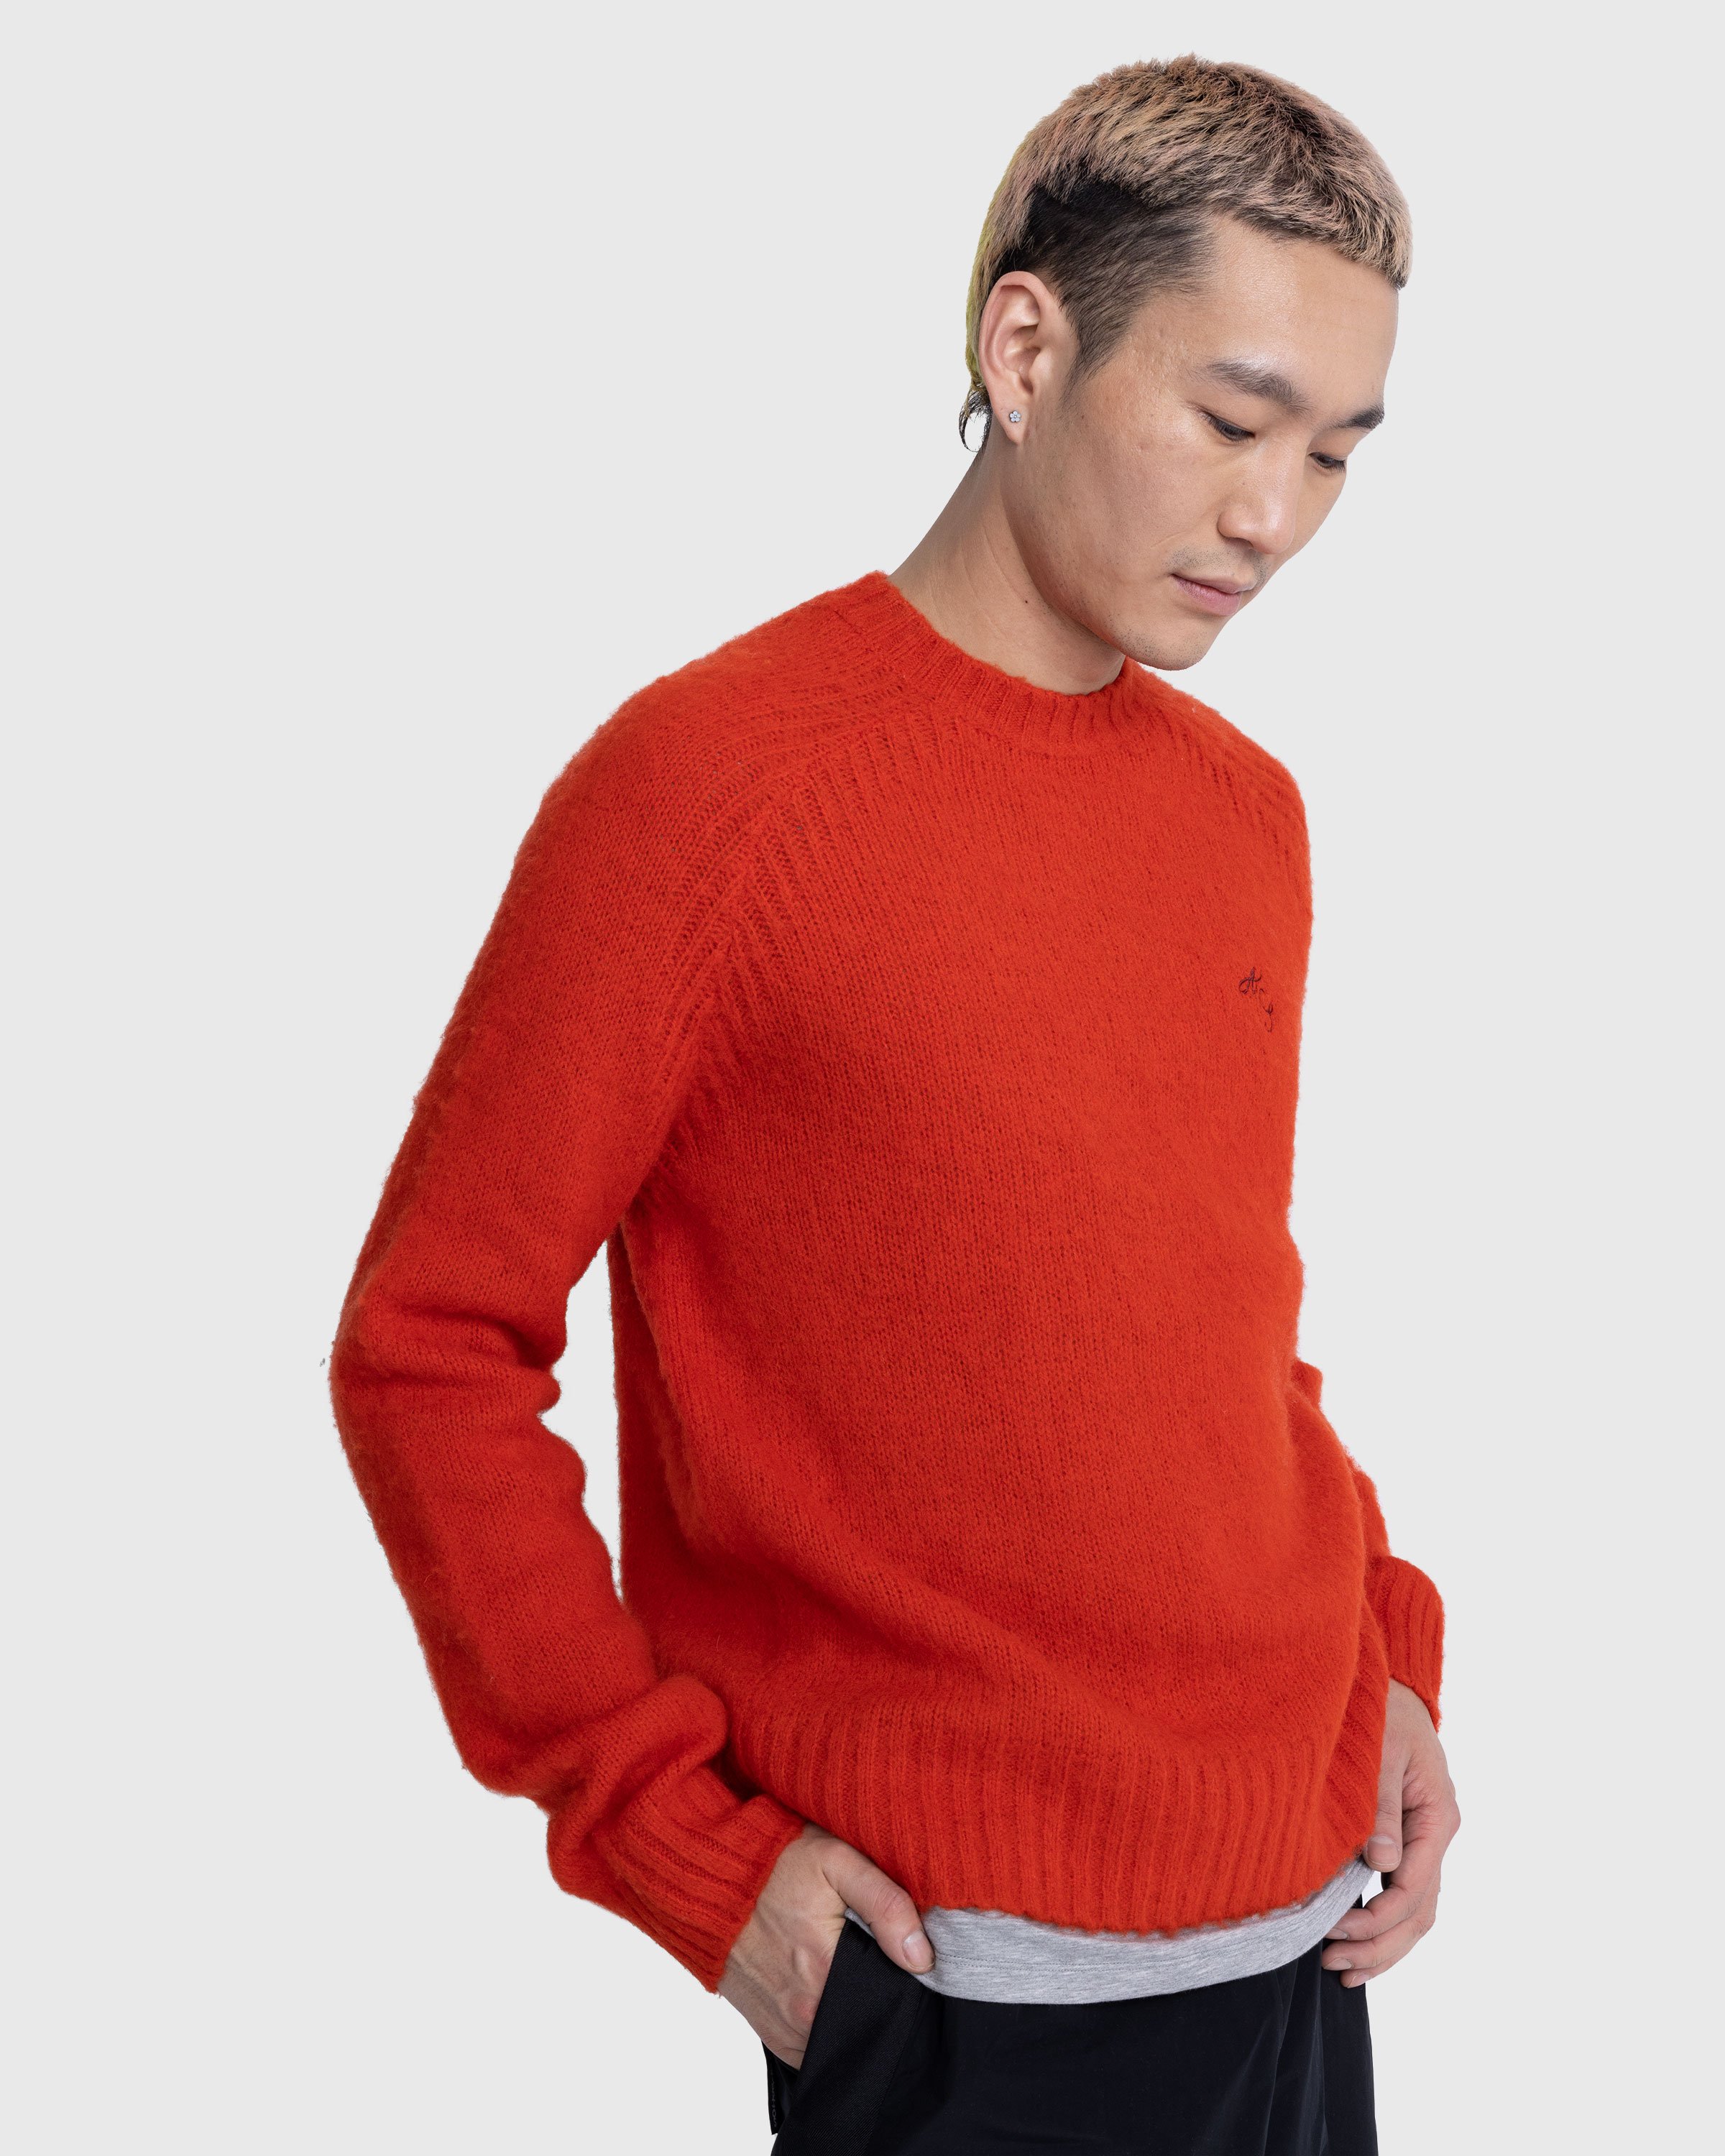 Acne Studios - Embroidered Crewneck Sweater Red - Clothing - Red - Image 5